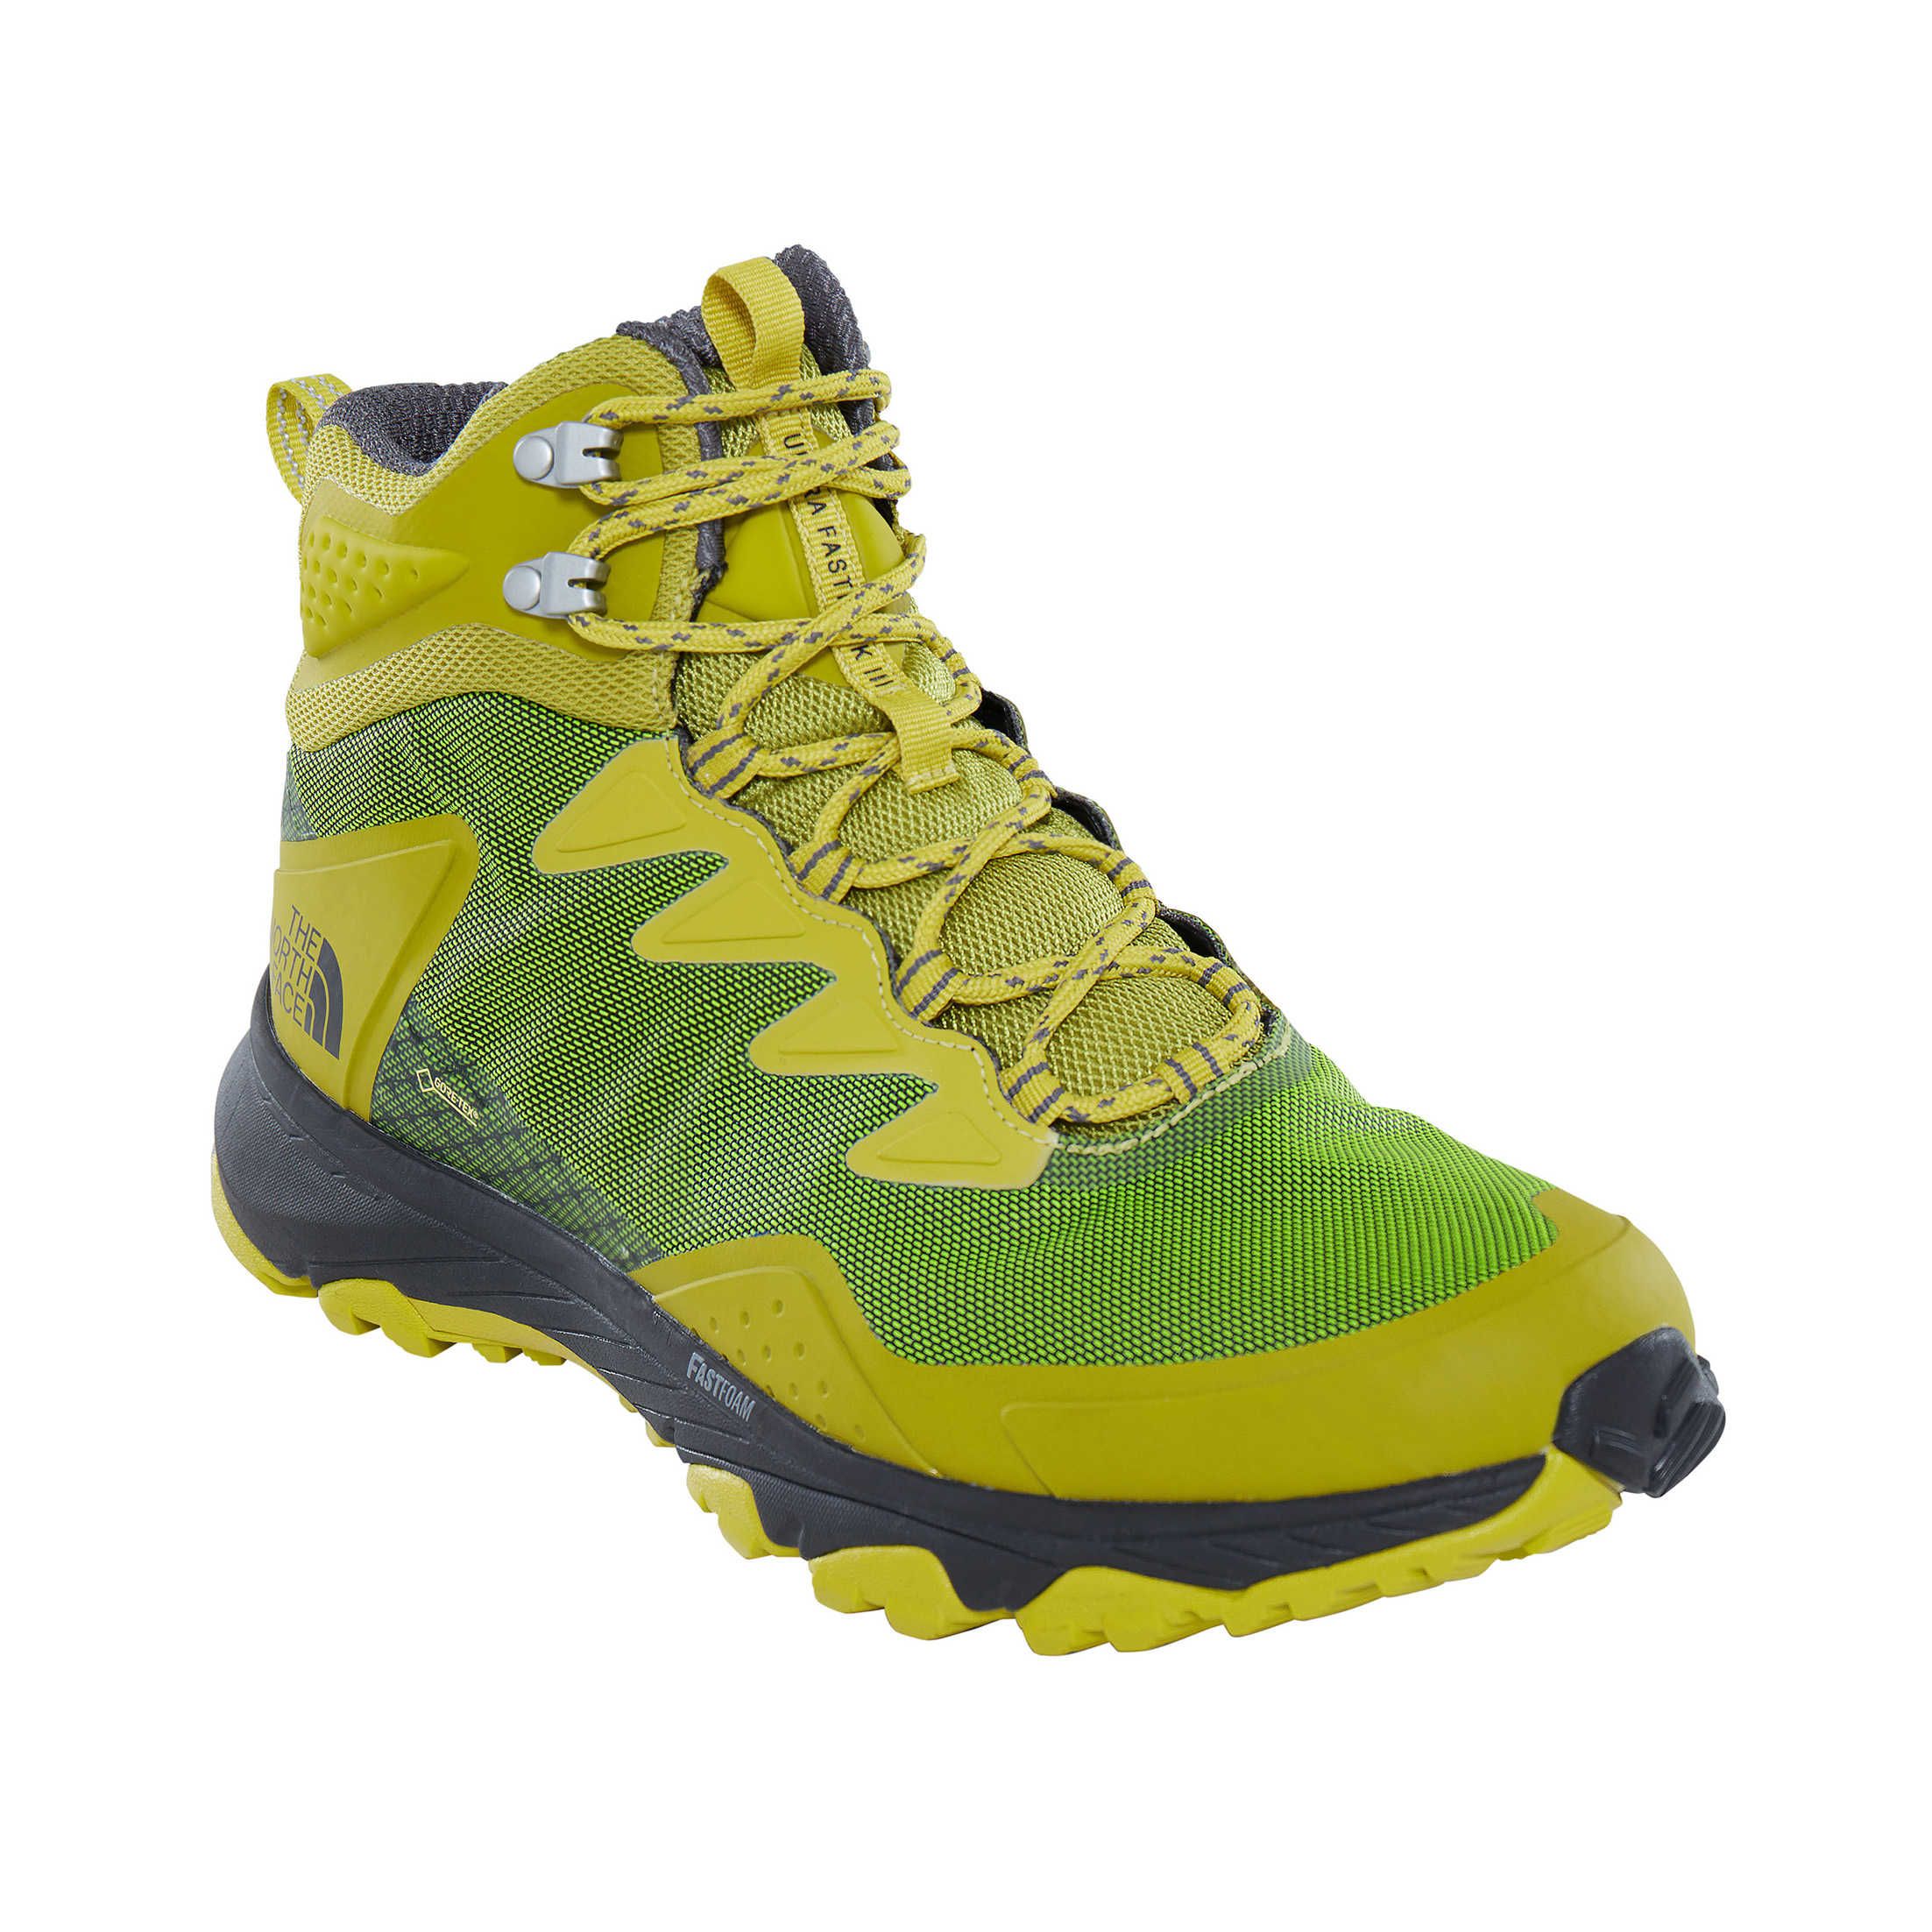 The North Face Ultra Fastpack III Mid GTX - Citronelle Green/Zinc Grey 